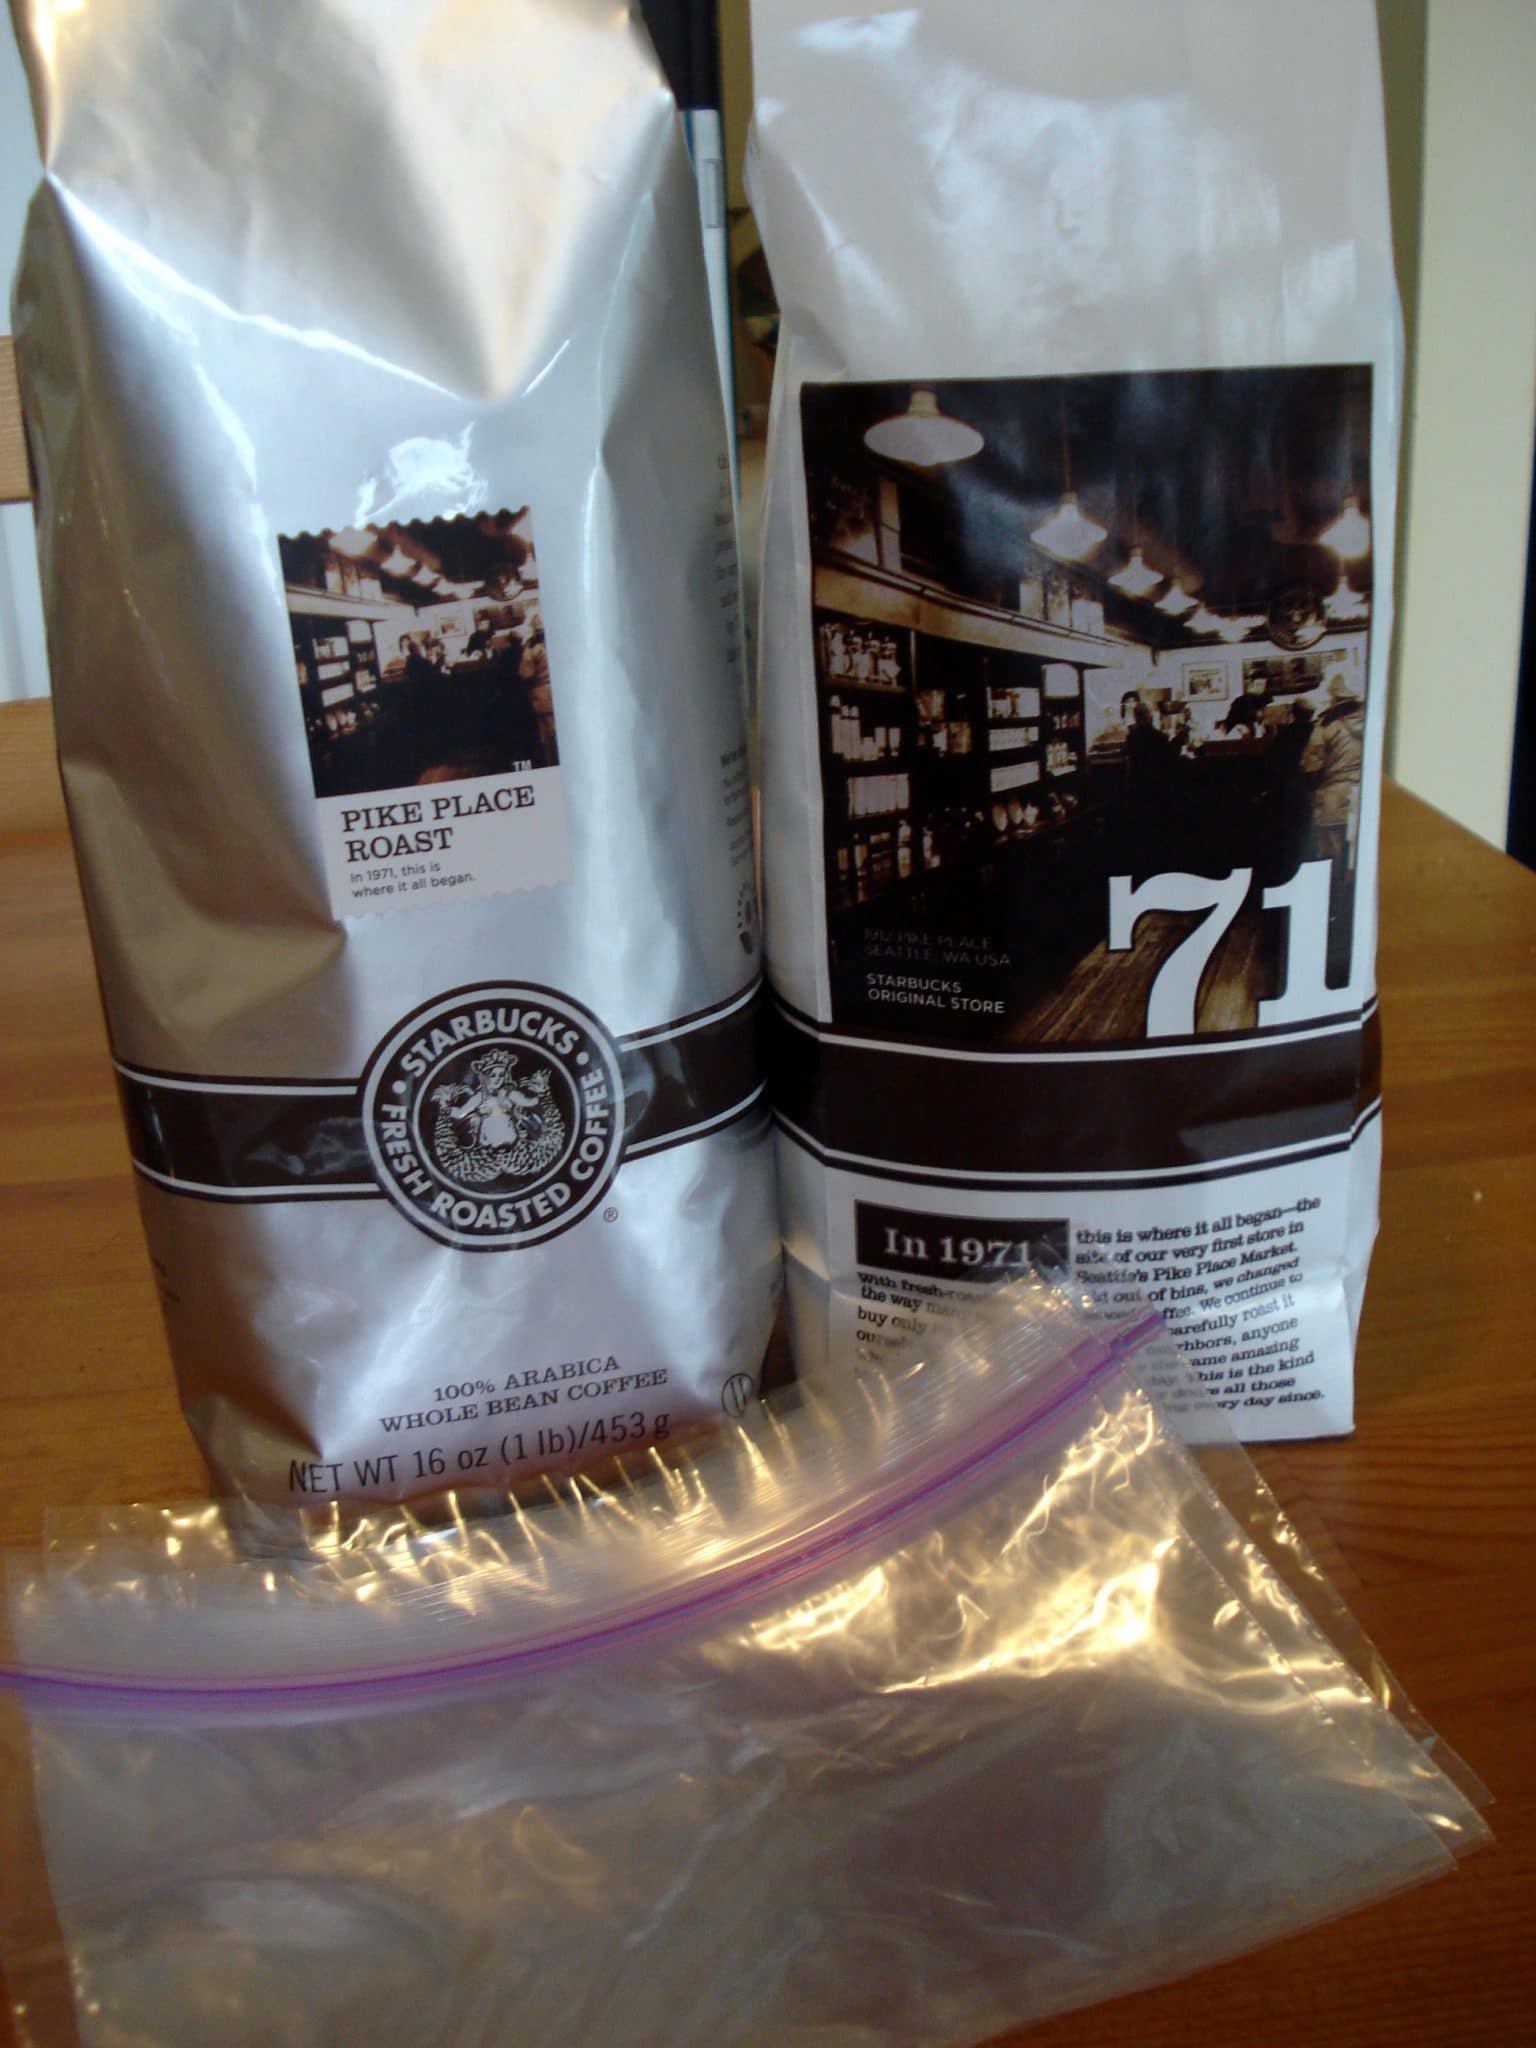 Two 1 lb bags of Starbucks Pike Place Roast